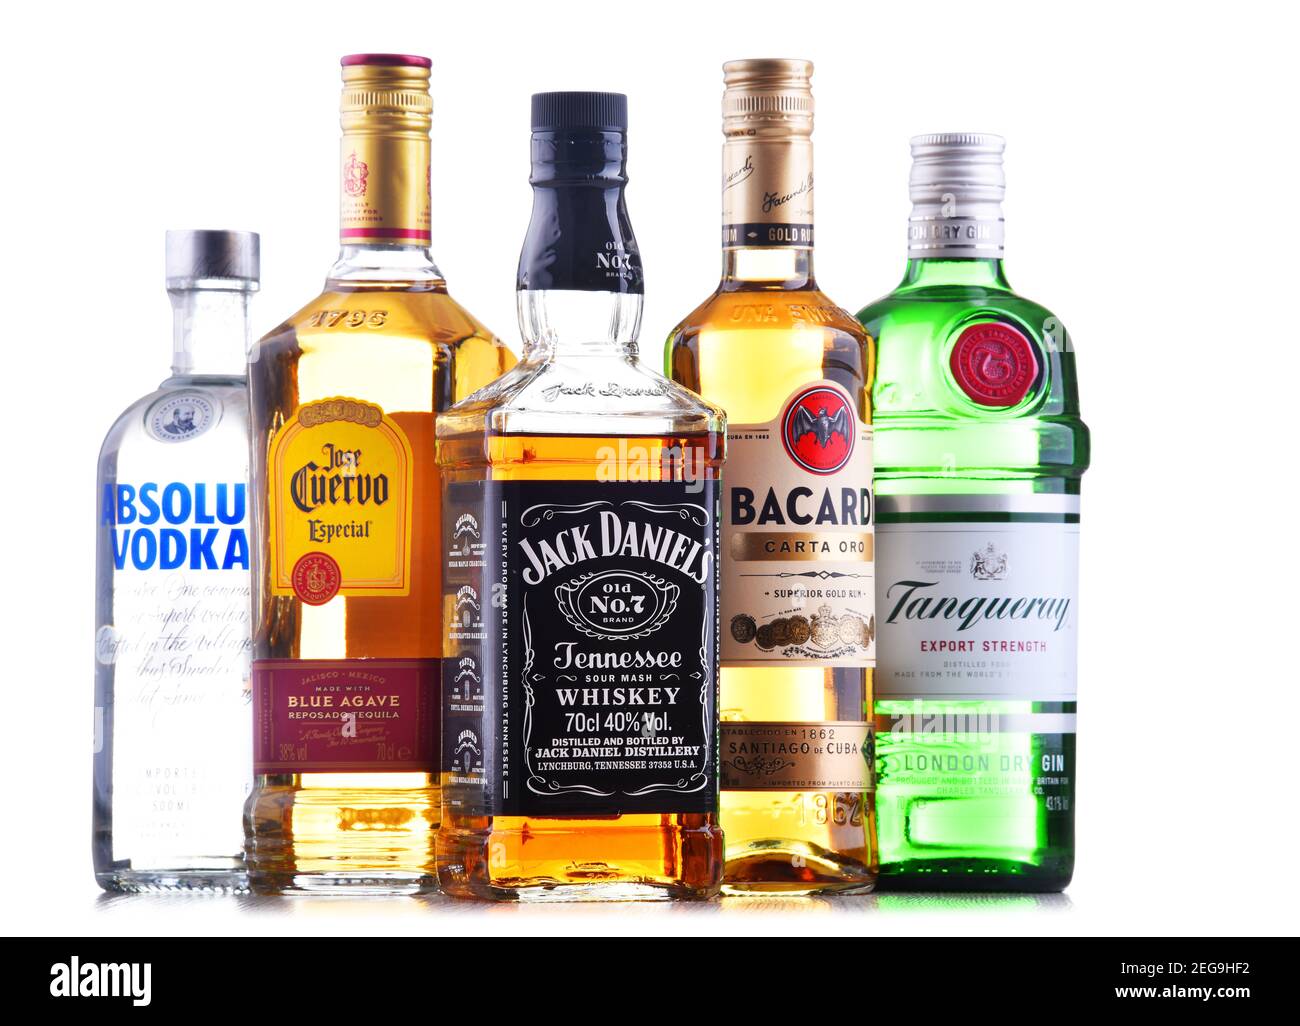 POZNAN, POL - OCT 30, 2020: Bottles of assorted global hard  liquor brands including whiskey, vodka, tequila and gin Stock Photo